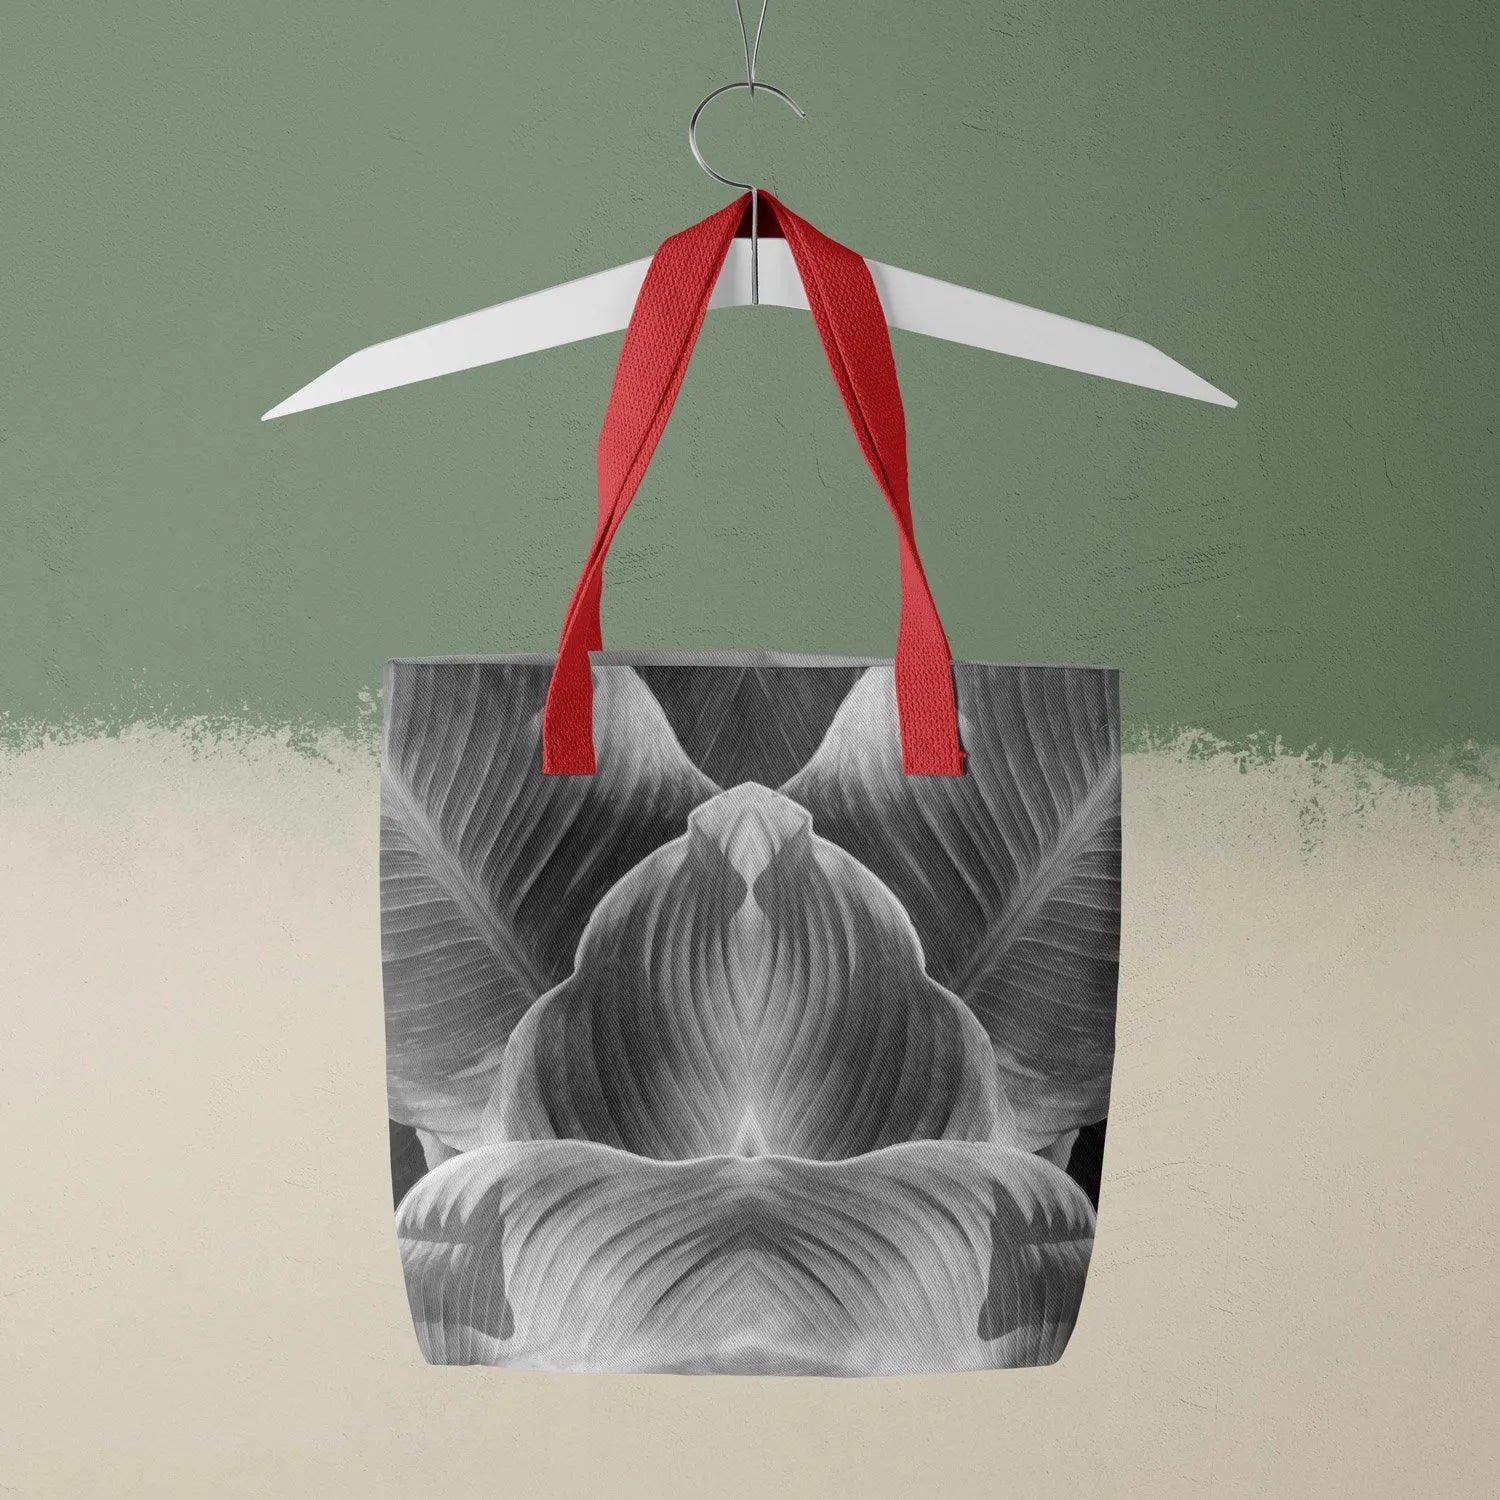 Step By Step Tote - Black And White - Heavy Duty Reusable Grocery Bag - Red Handles - Shopping Totes - Aesthetic Art